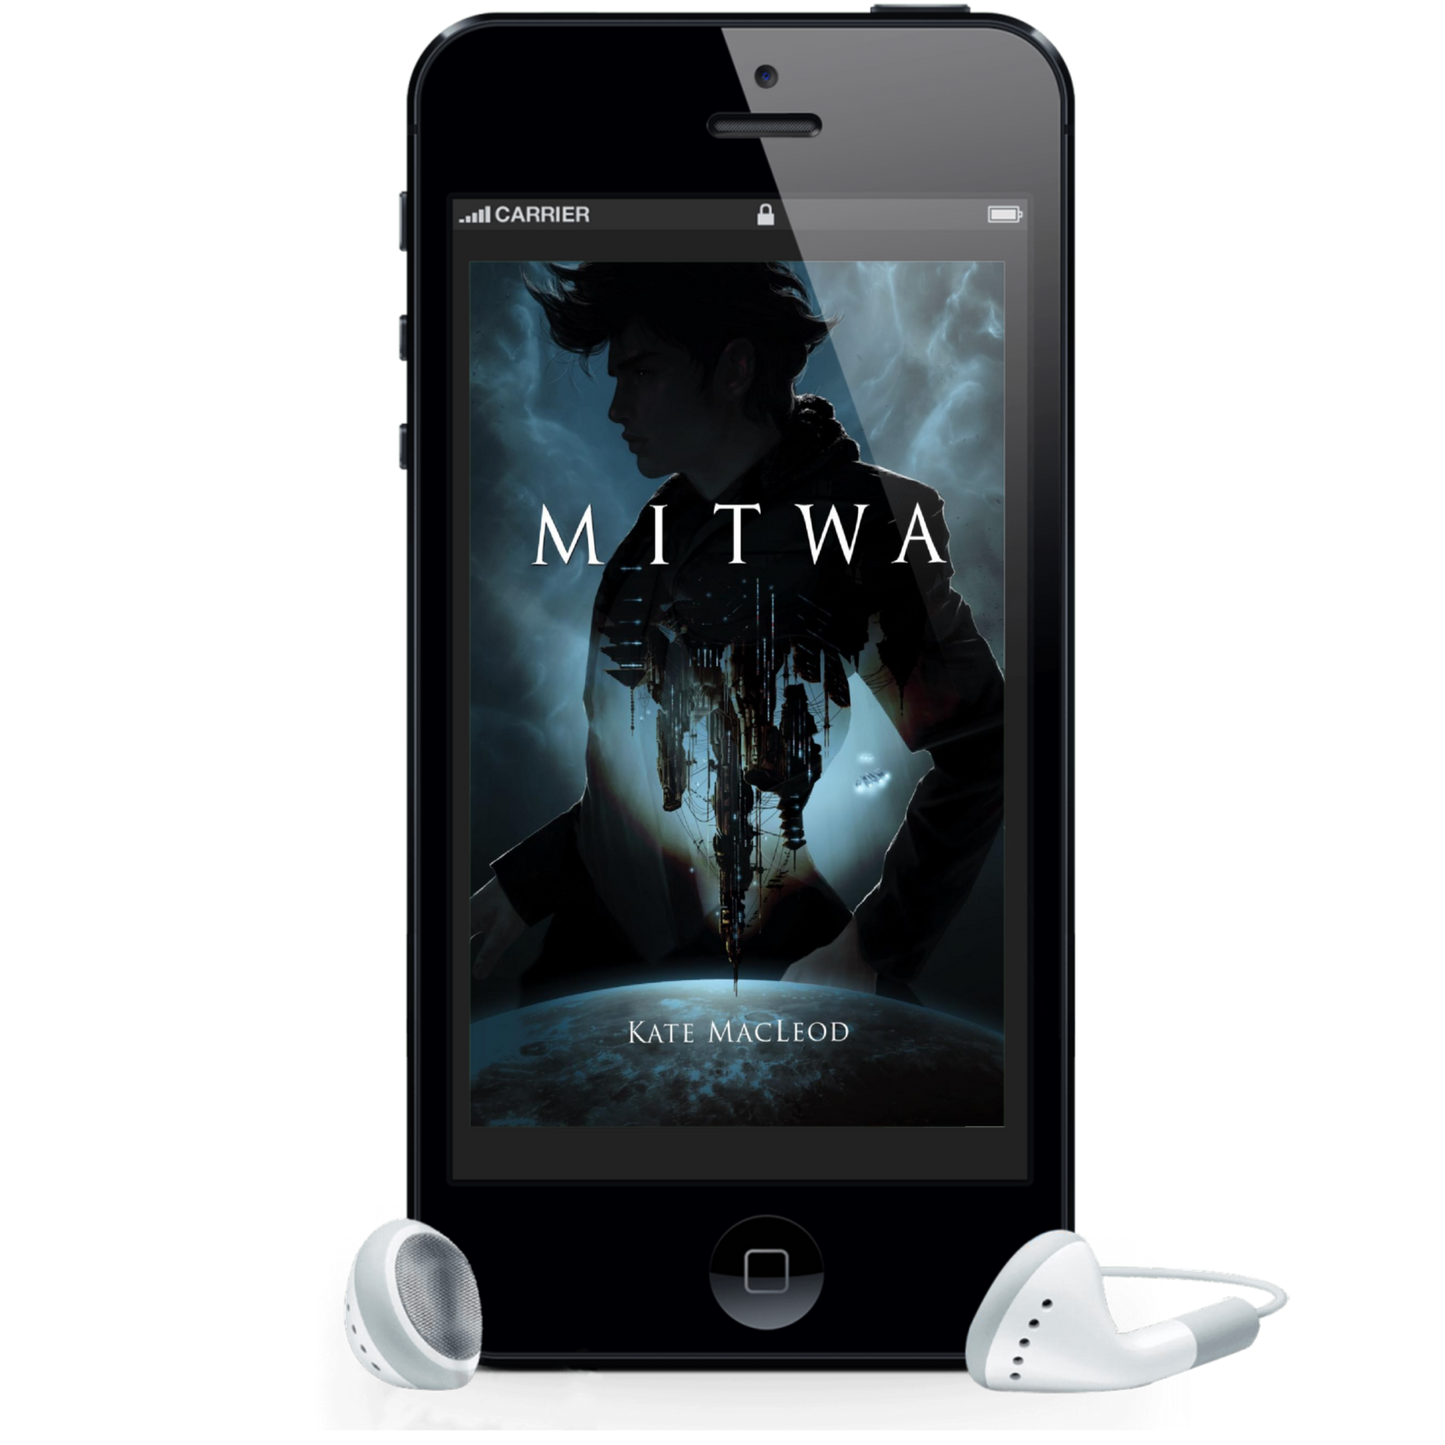 Cover for the audiobook version of the book Mitwa.